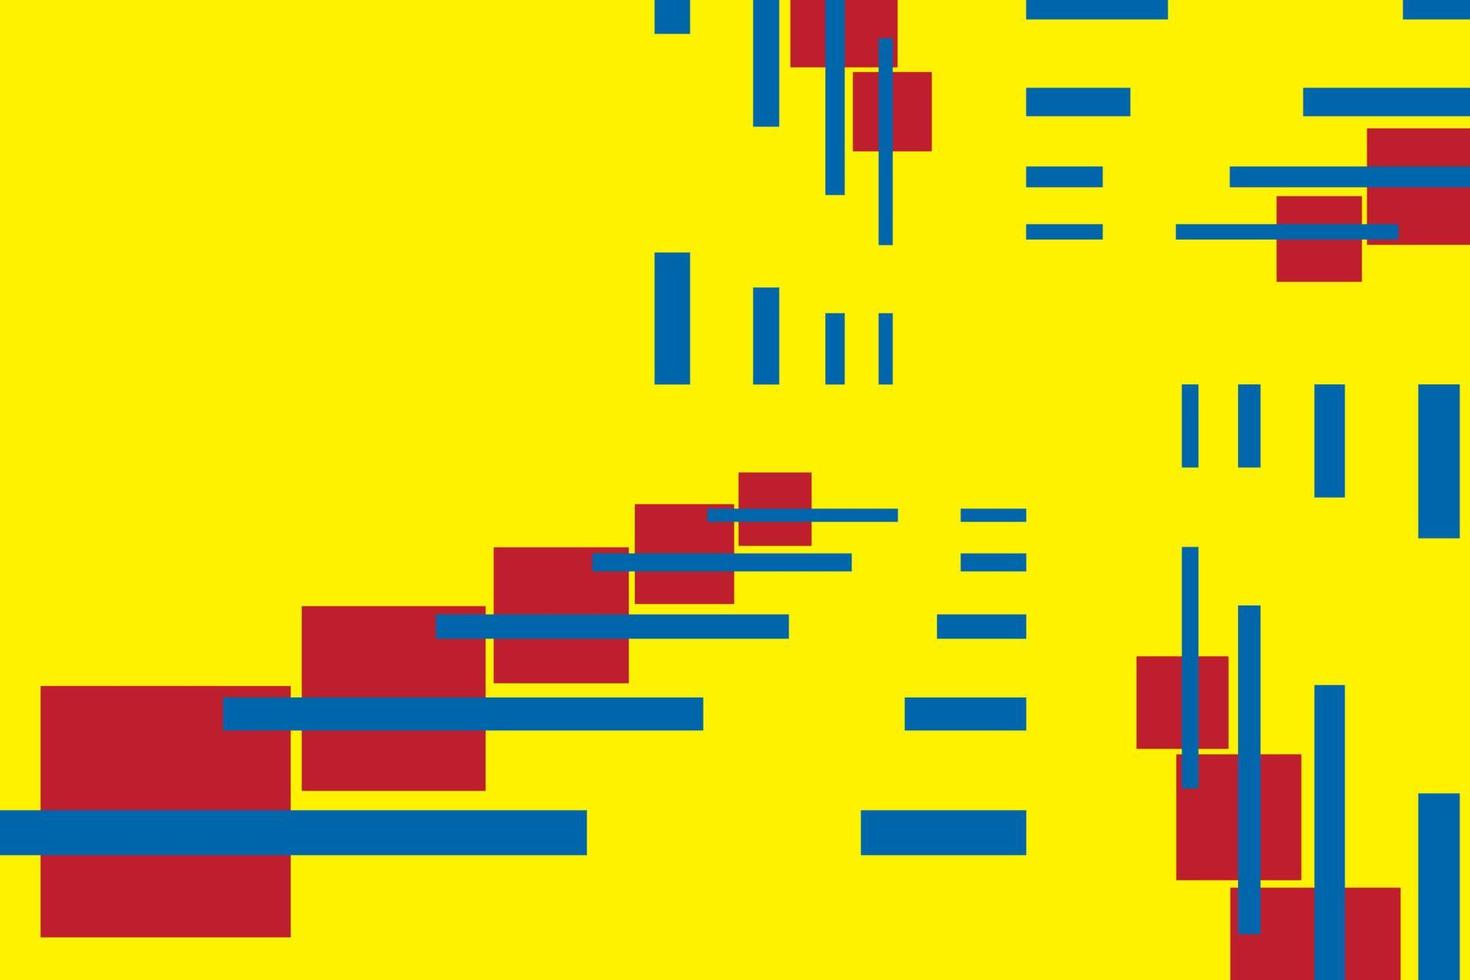 Primary colors background, blue, red, and yellow in rectangle shape. Vector illustration.